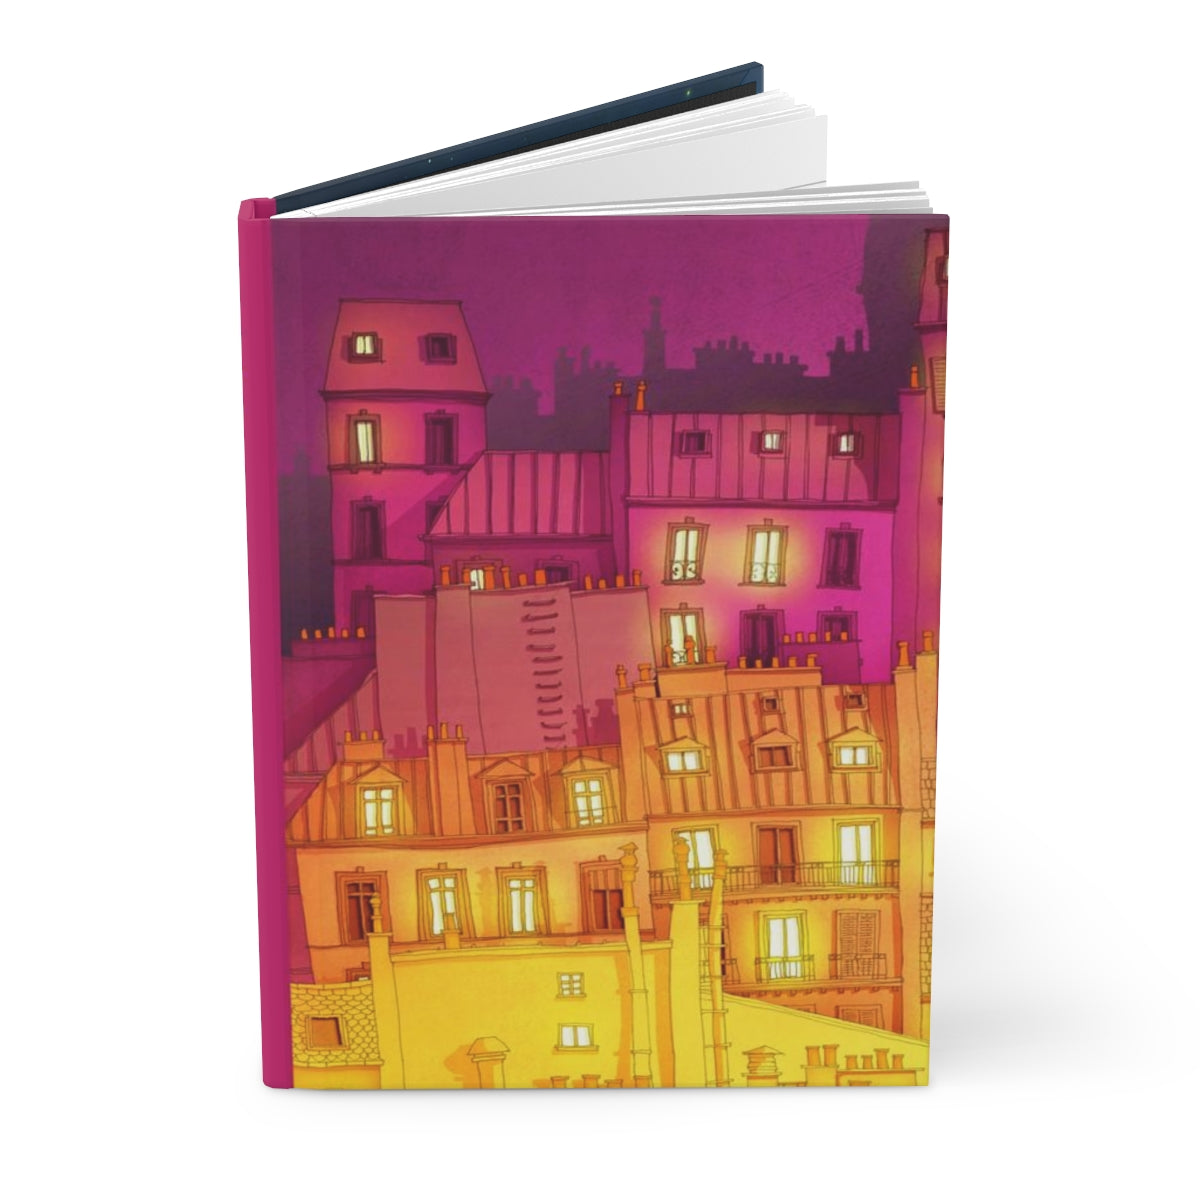 You are not alone & Montmartre at night - Paris Art Journal No.2